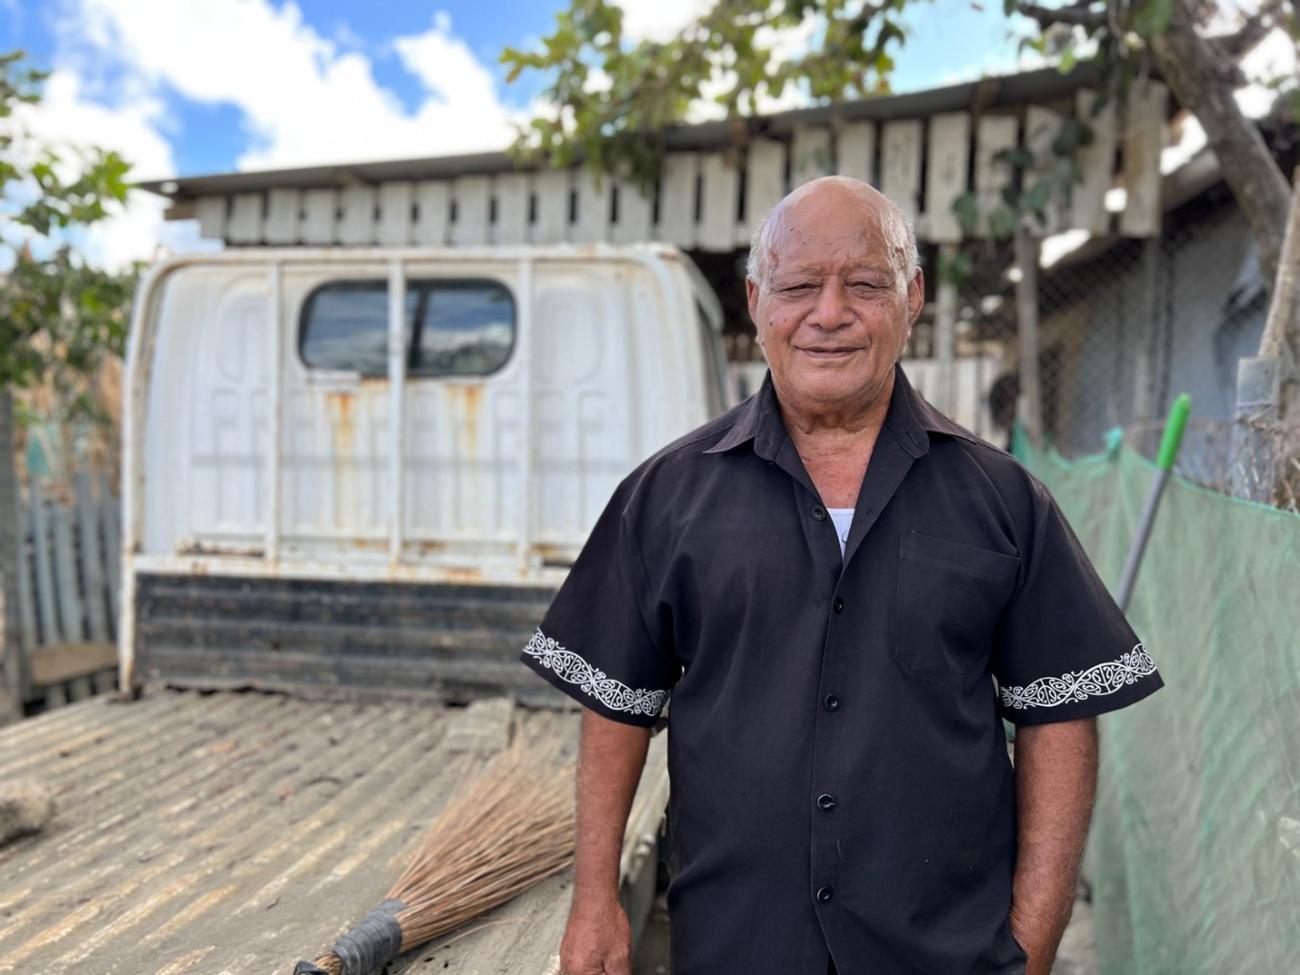 The natural disasters were a major blow to 74-year-old Fangupō Lātū, from the village of Pātangata. His fishing boat was sunk and destroyed during the tsunami, leaving him unable to make a living. 